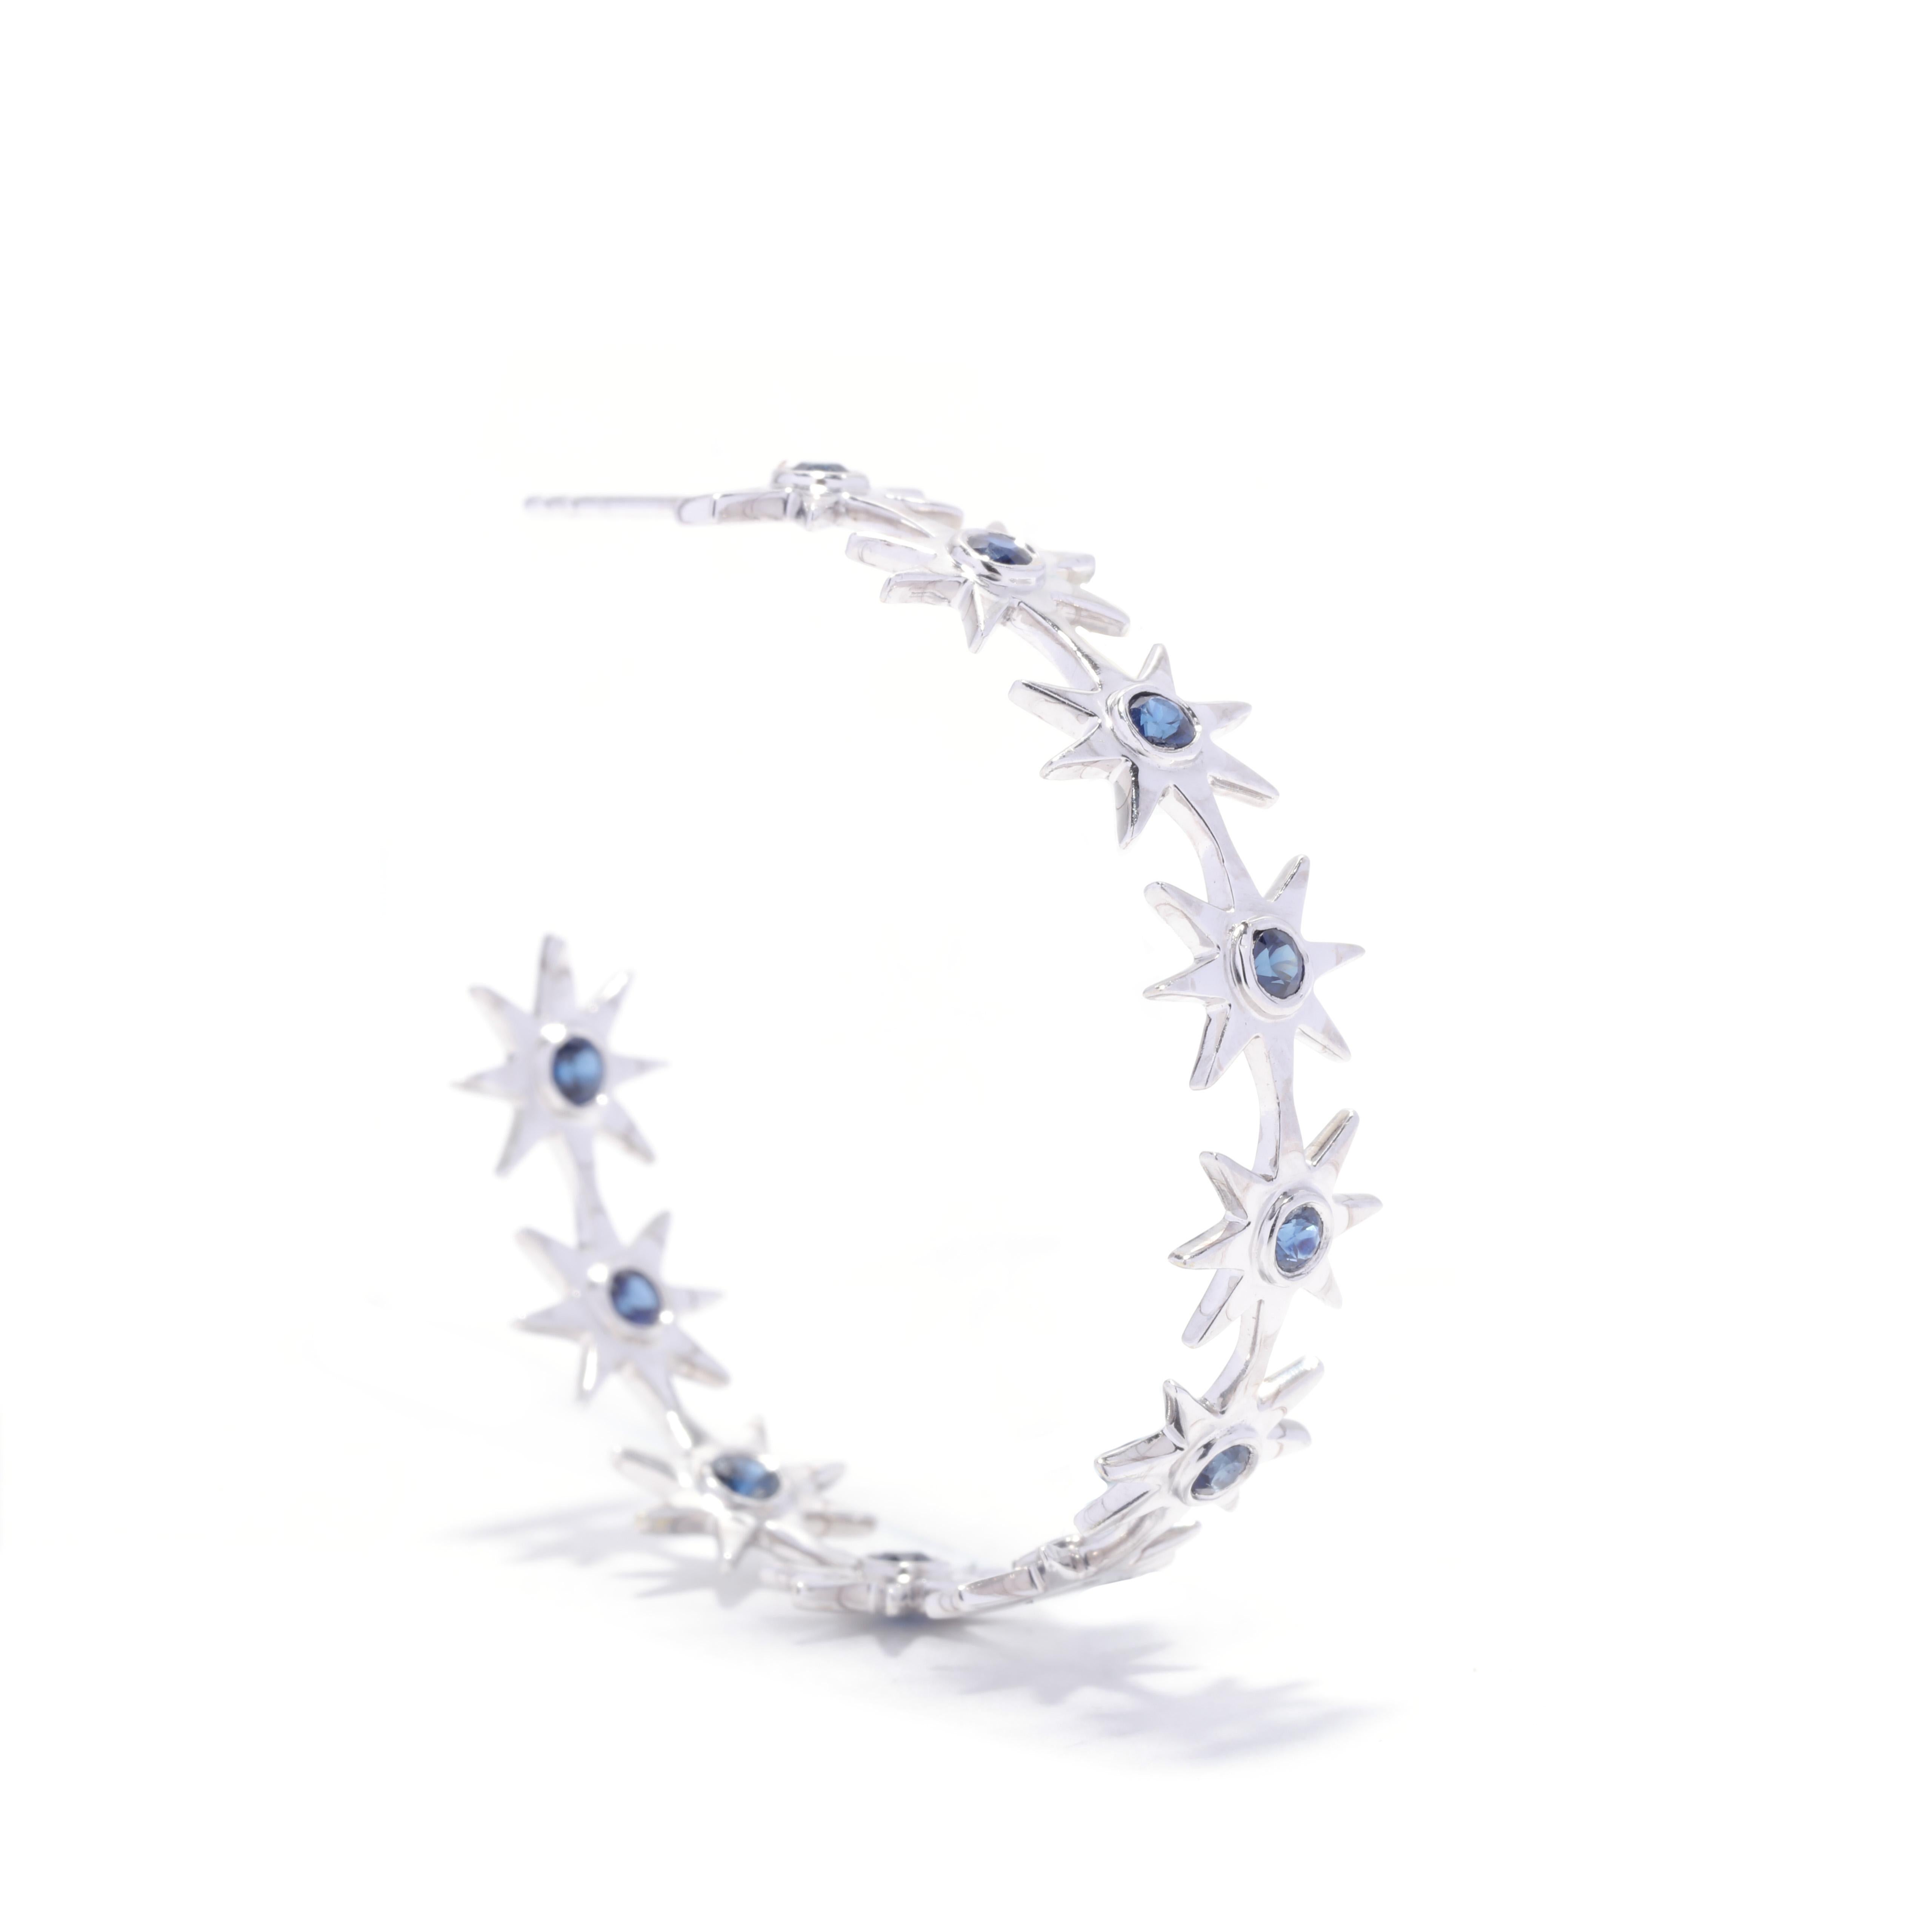 A pair of 18 karat white gold sapphire star hoop earrings. These large funky hoops feature a repeating pattern of star shapes, each with a bezel set round cut sapphire weighing approximately 2 total carats and with pierced push backs.

Stones:
-